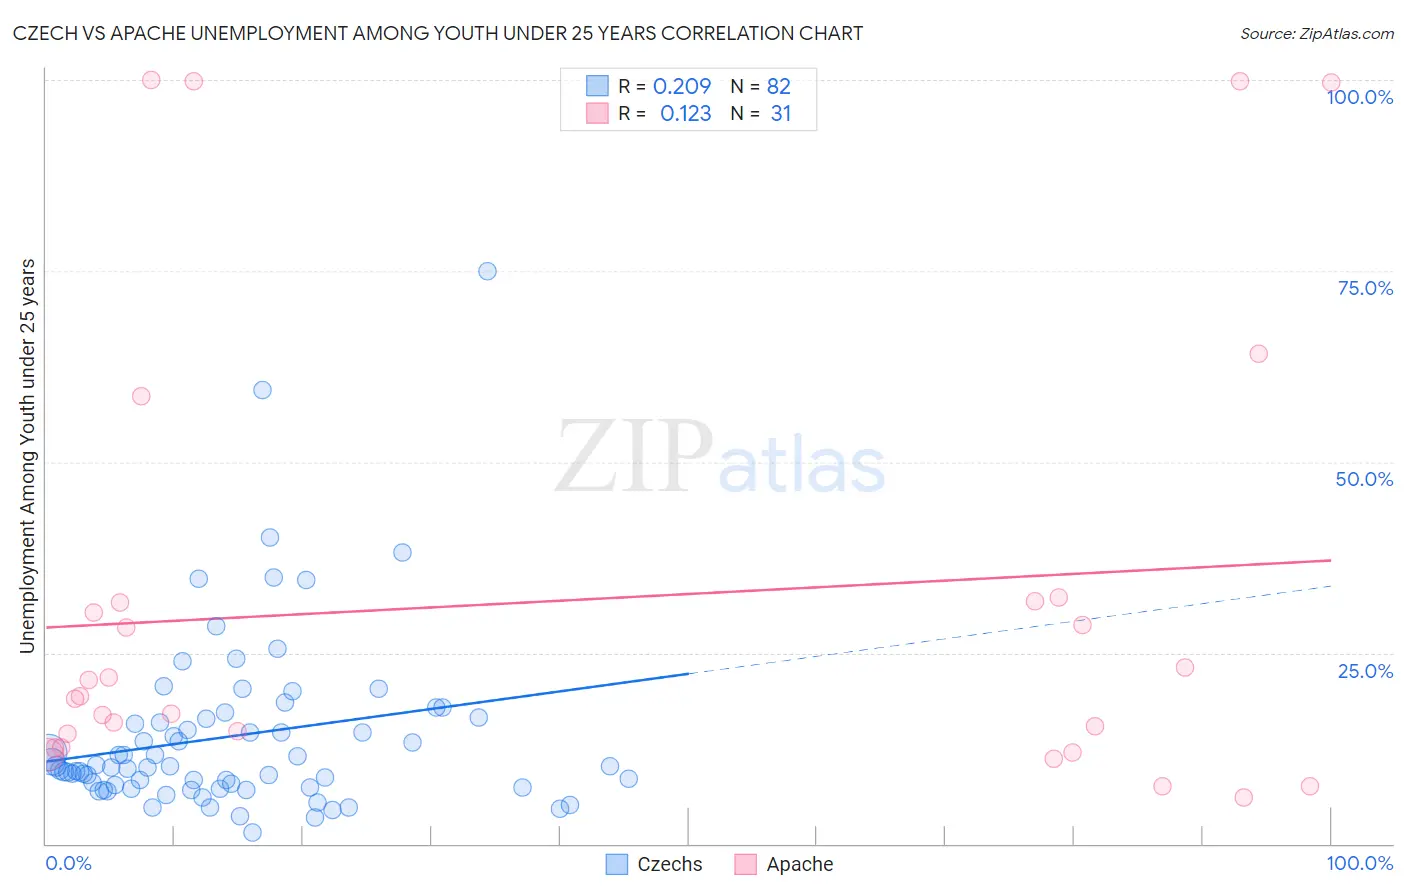 Czech vs Apache Unemployment Among Youth under 25 years